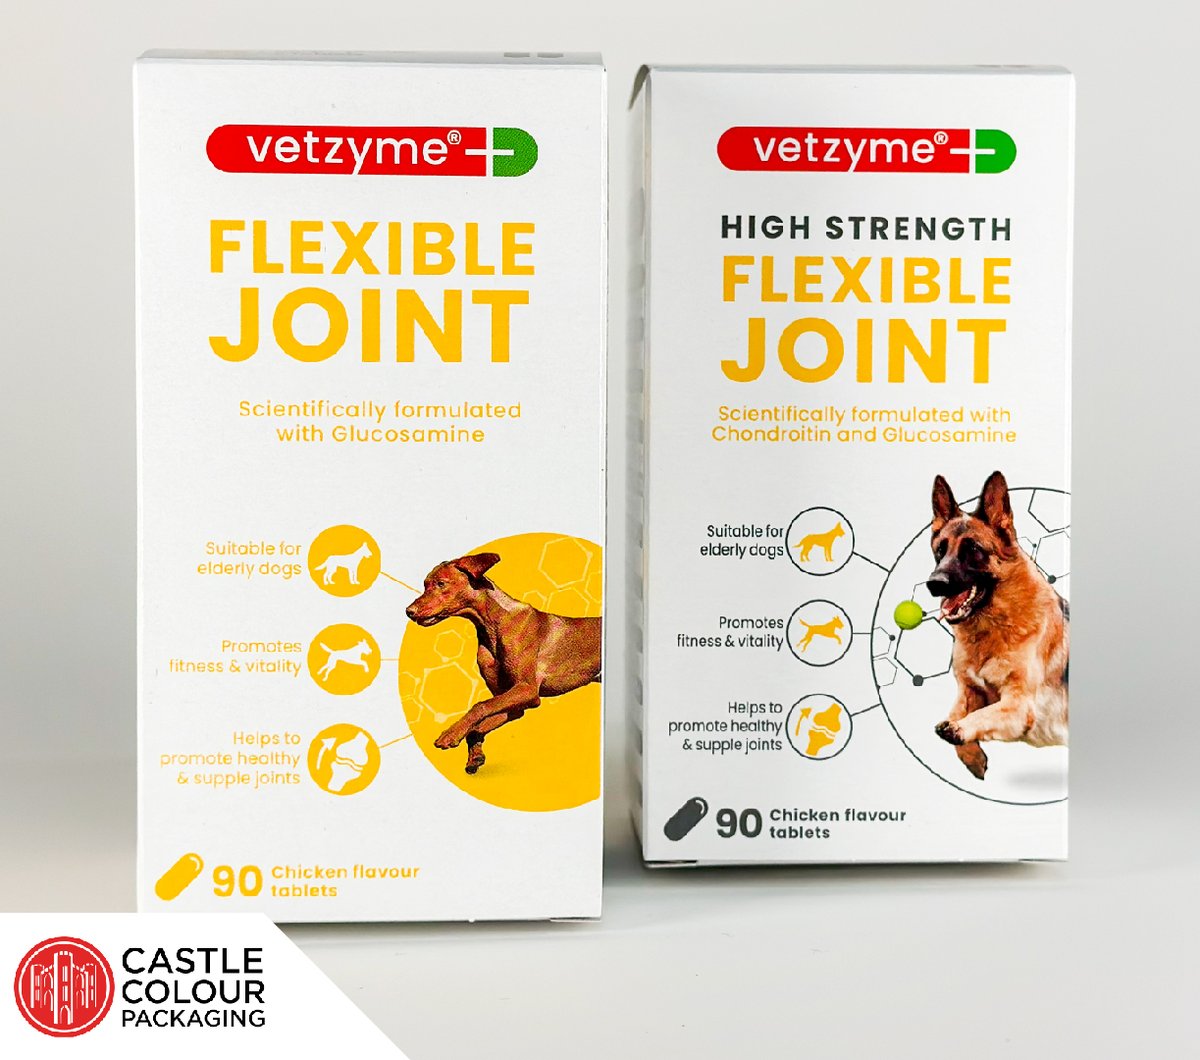 Did you know April is #NationalPetMonth! We can help with all your petcare #packagingsolutions! Whether you’re looking to #reduceplastic in #packaging your products or considering a #rebrand to make your packaging stand out, we’ve got you covered! #retail #ukmanufacturing